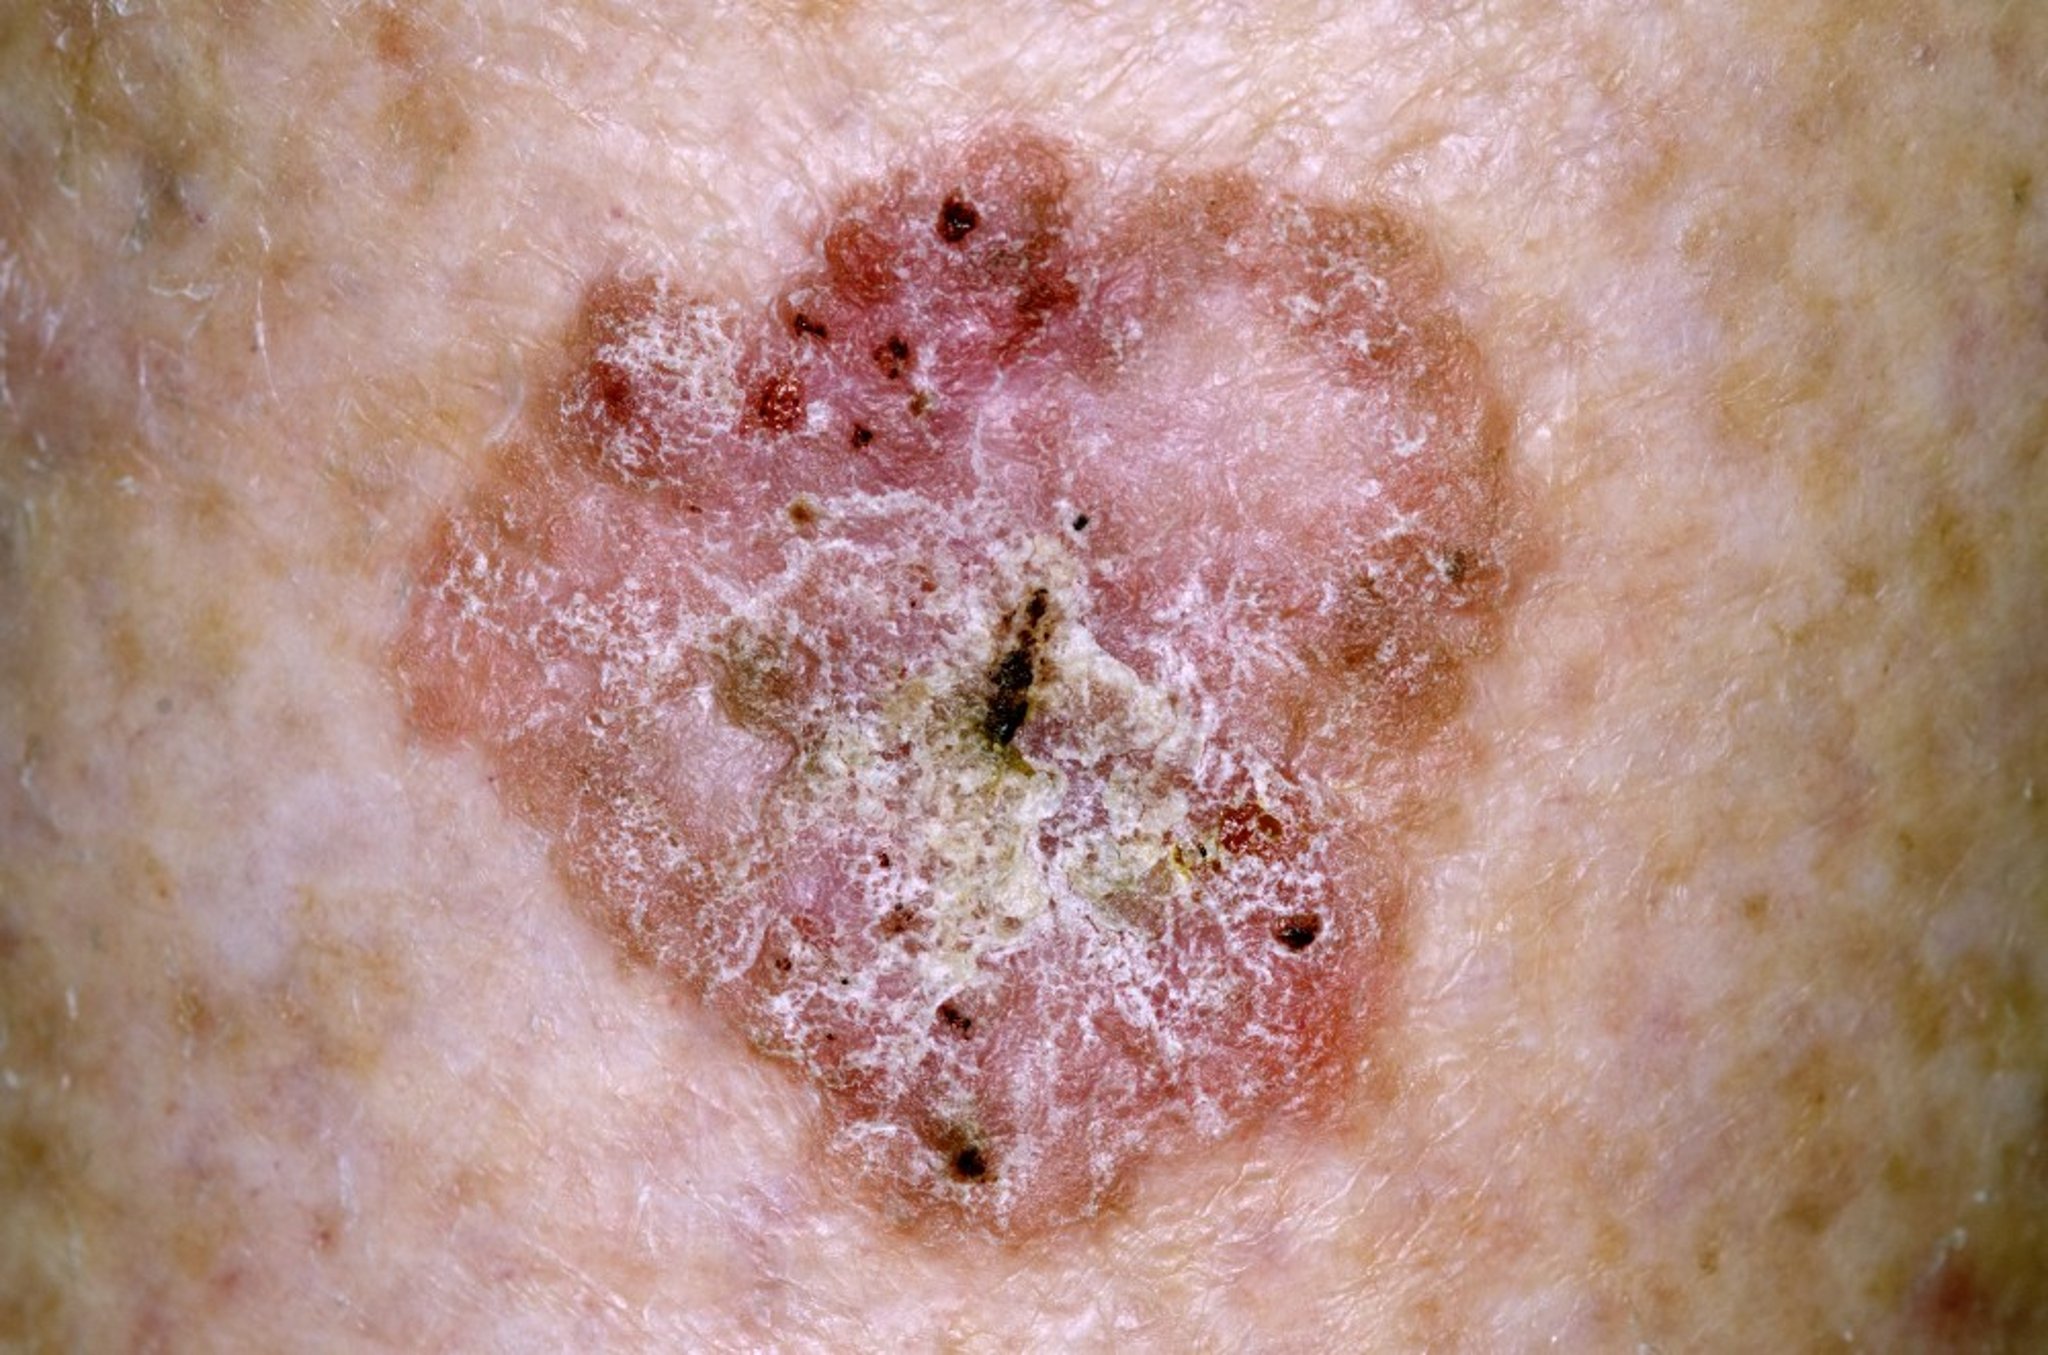 Squamous Cell Carcinoma in Situ (Shin)